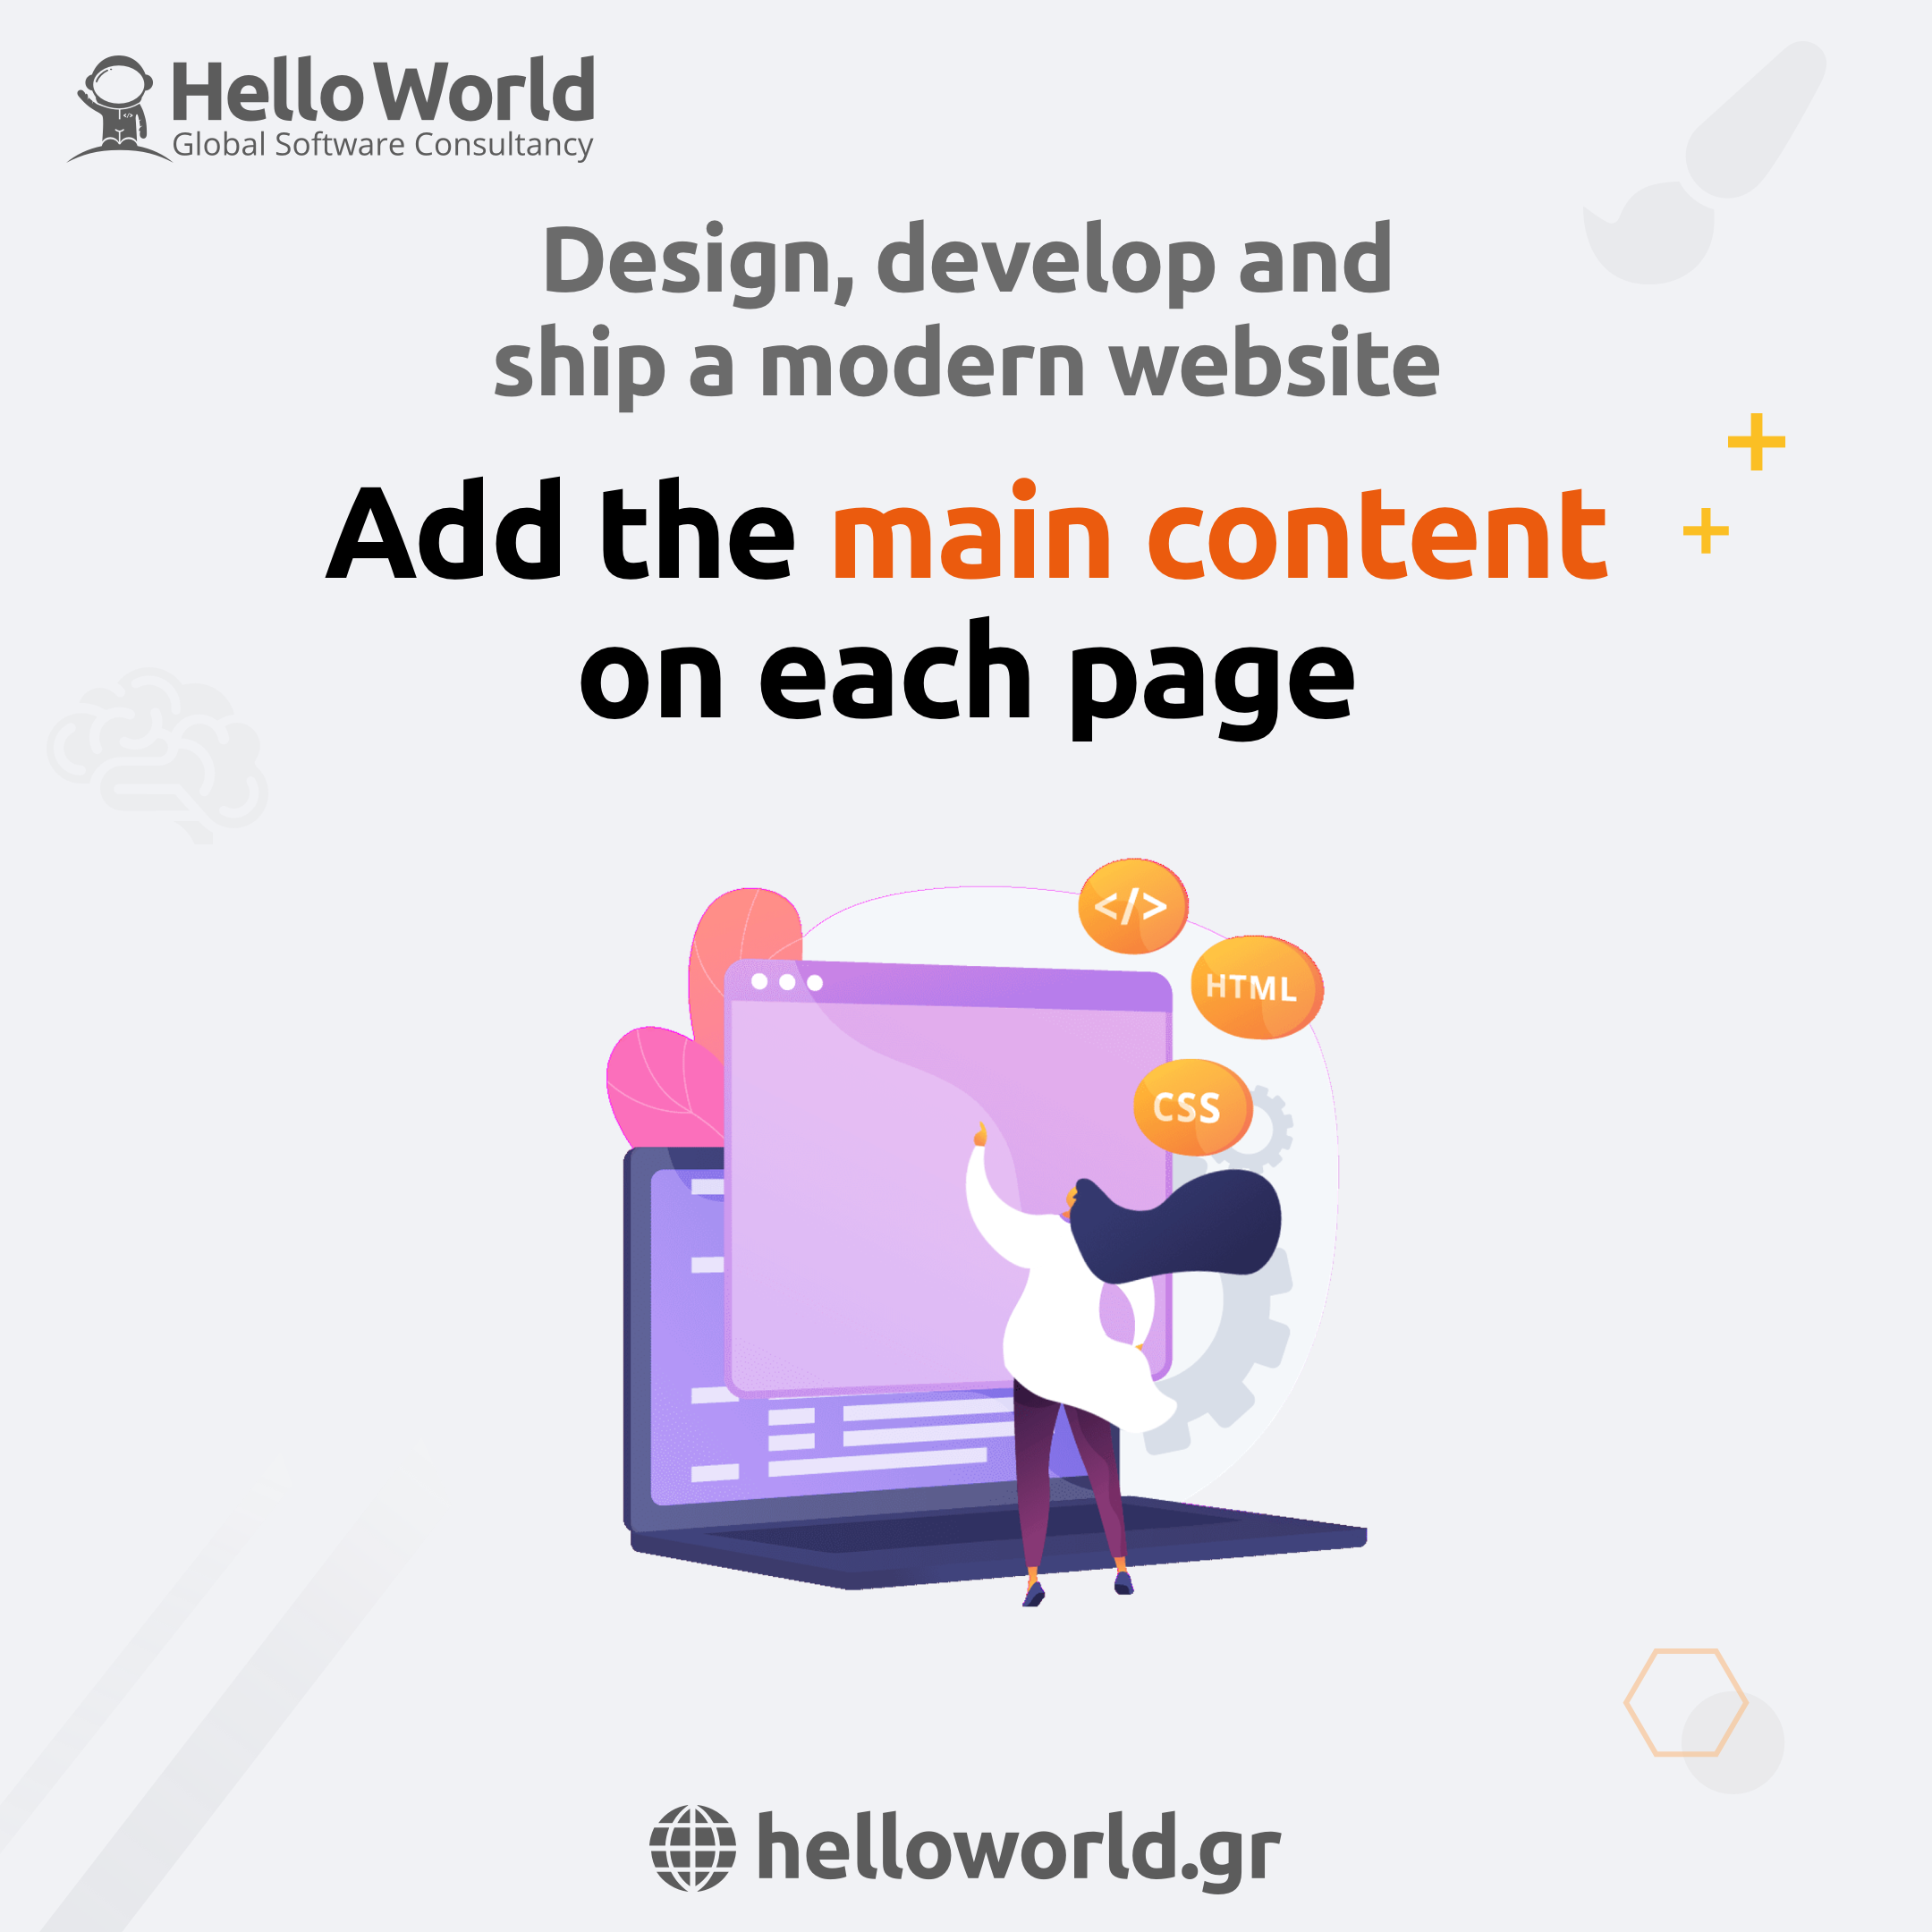 Modern Website: Add the main content on each page